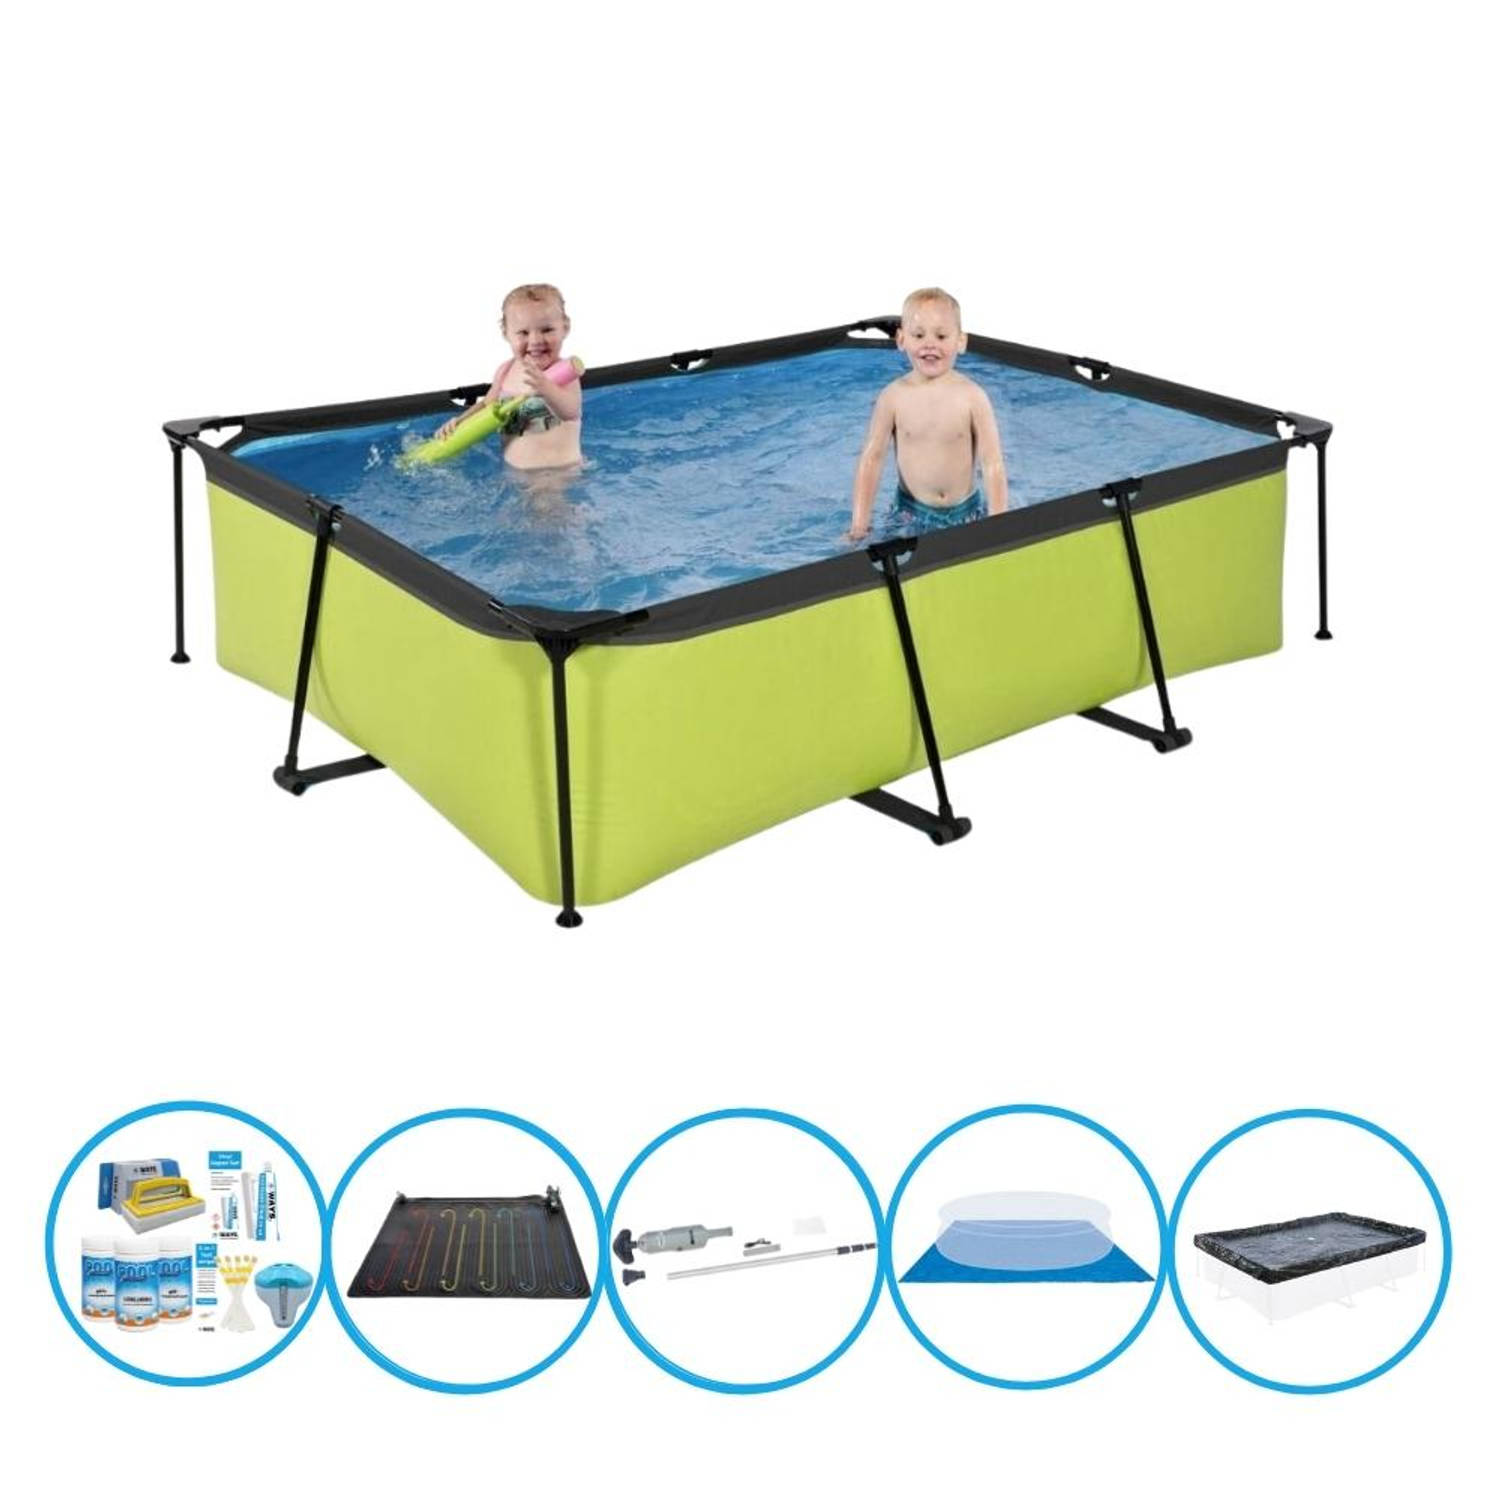 Exit Zwembad Lime Frame Pool 220x150x60 Cm Met Accessoires